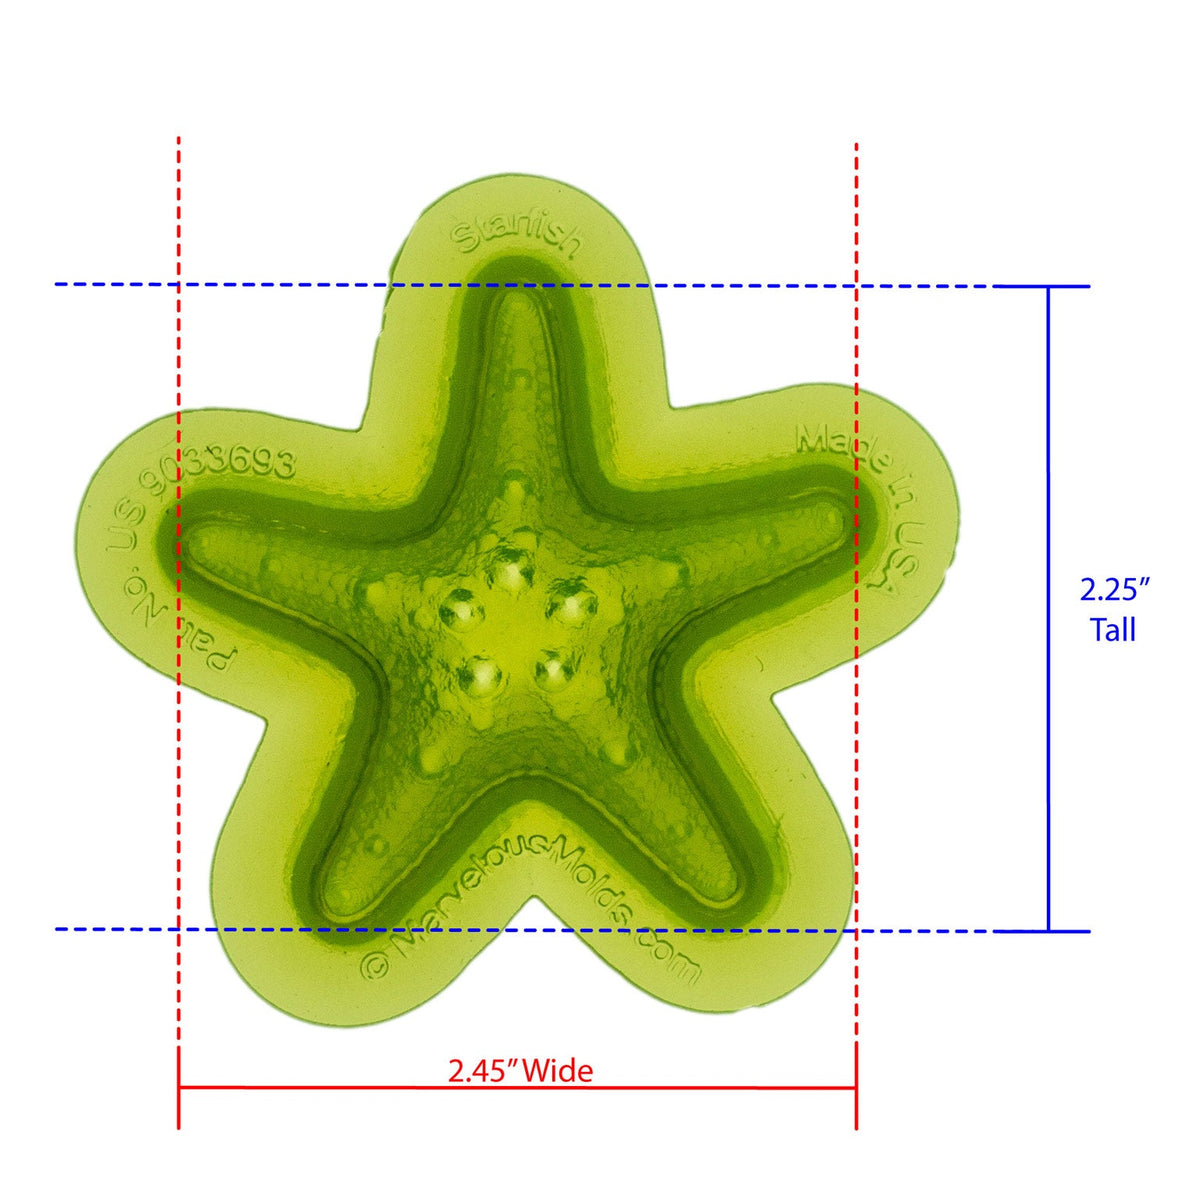 Starfish Silicone Mold Cavity Measurs 2.45 inches Wide by 2.25 inches Tall, proudly Made in USA